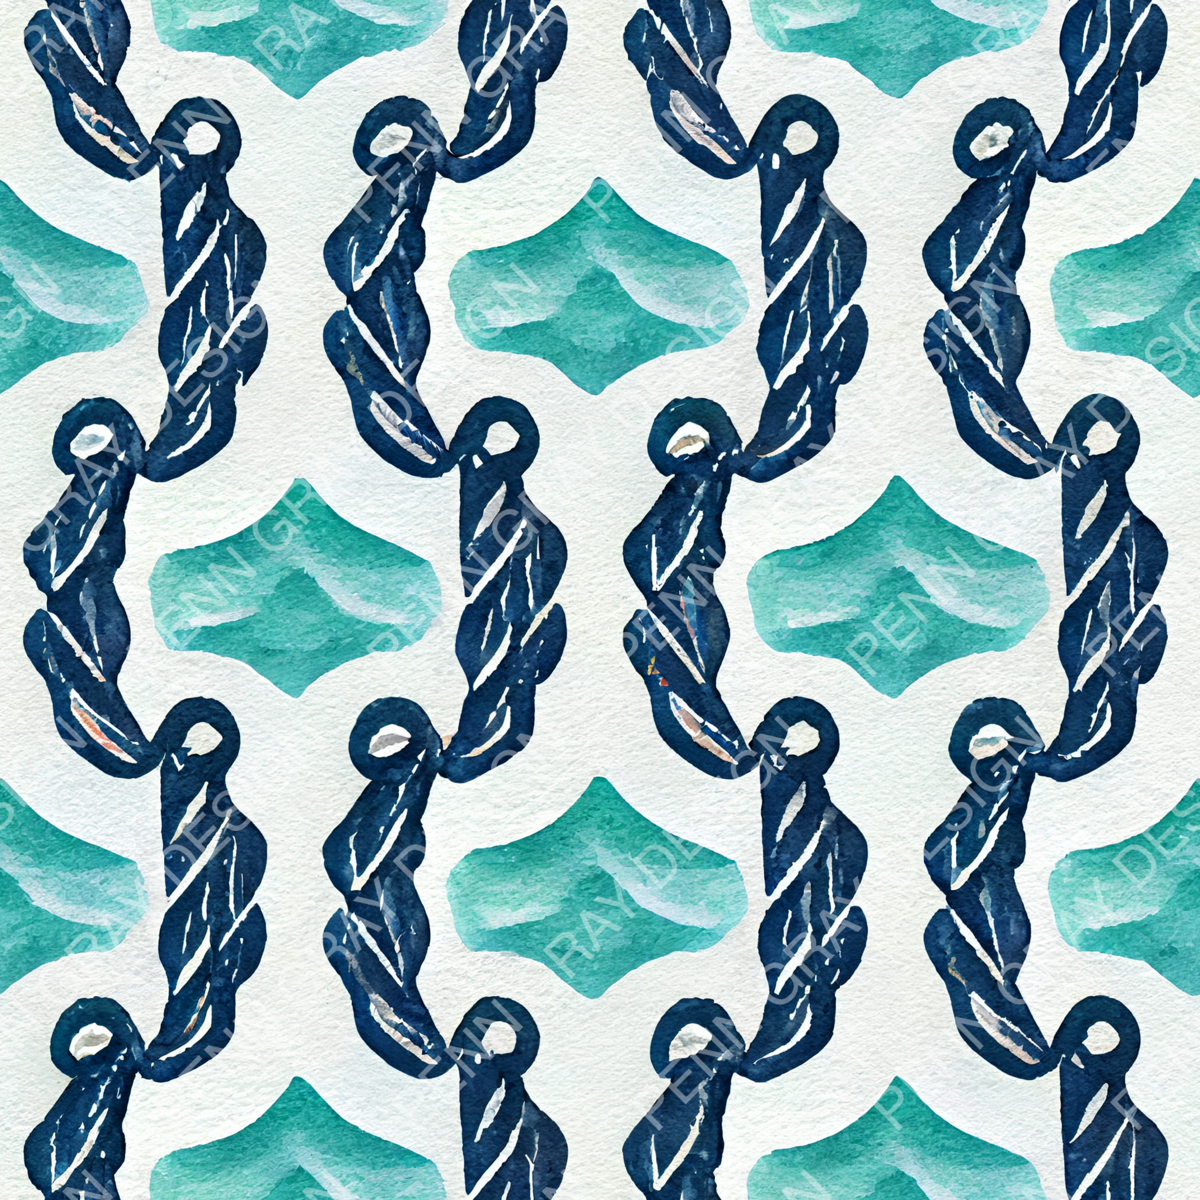 ropes-anchors-03-(watermarked)